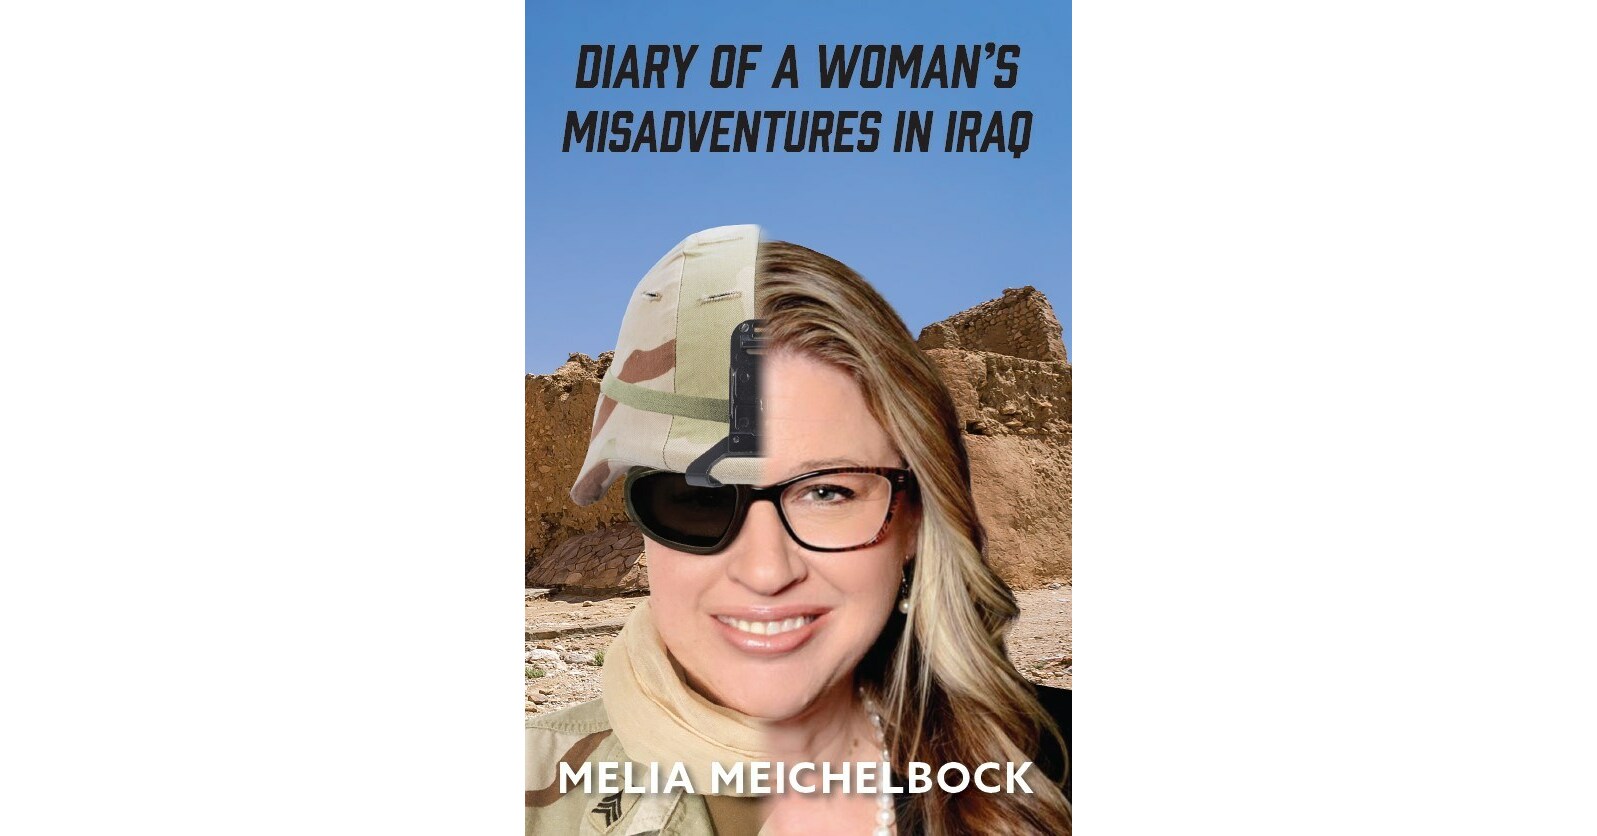 diary-of-a-woman-s-misadventures-in-iraq-a-tmi-journey-from-pr-executive-to-machine-gunner-on-the-front-lines-of-war